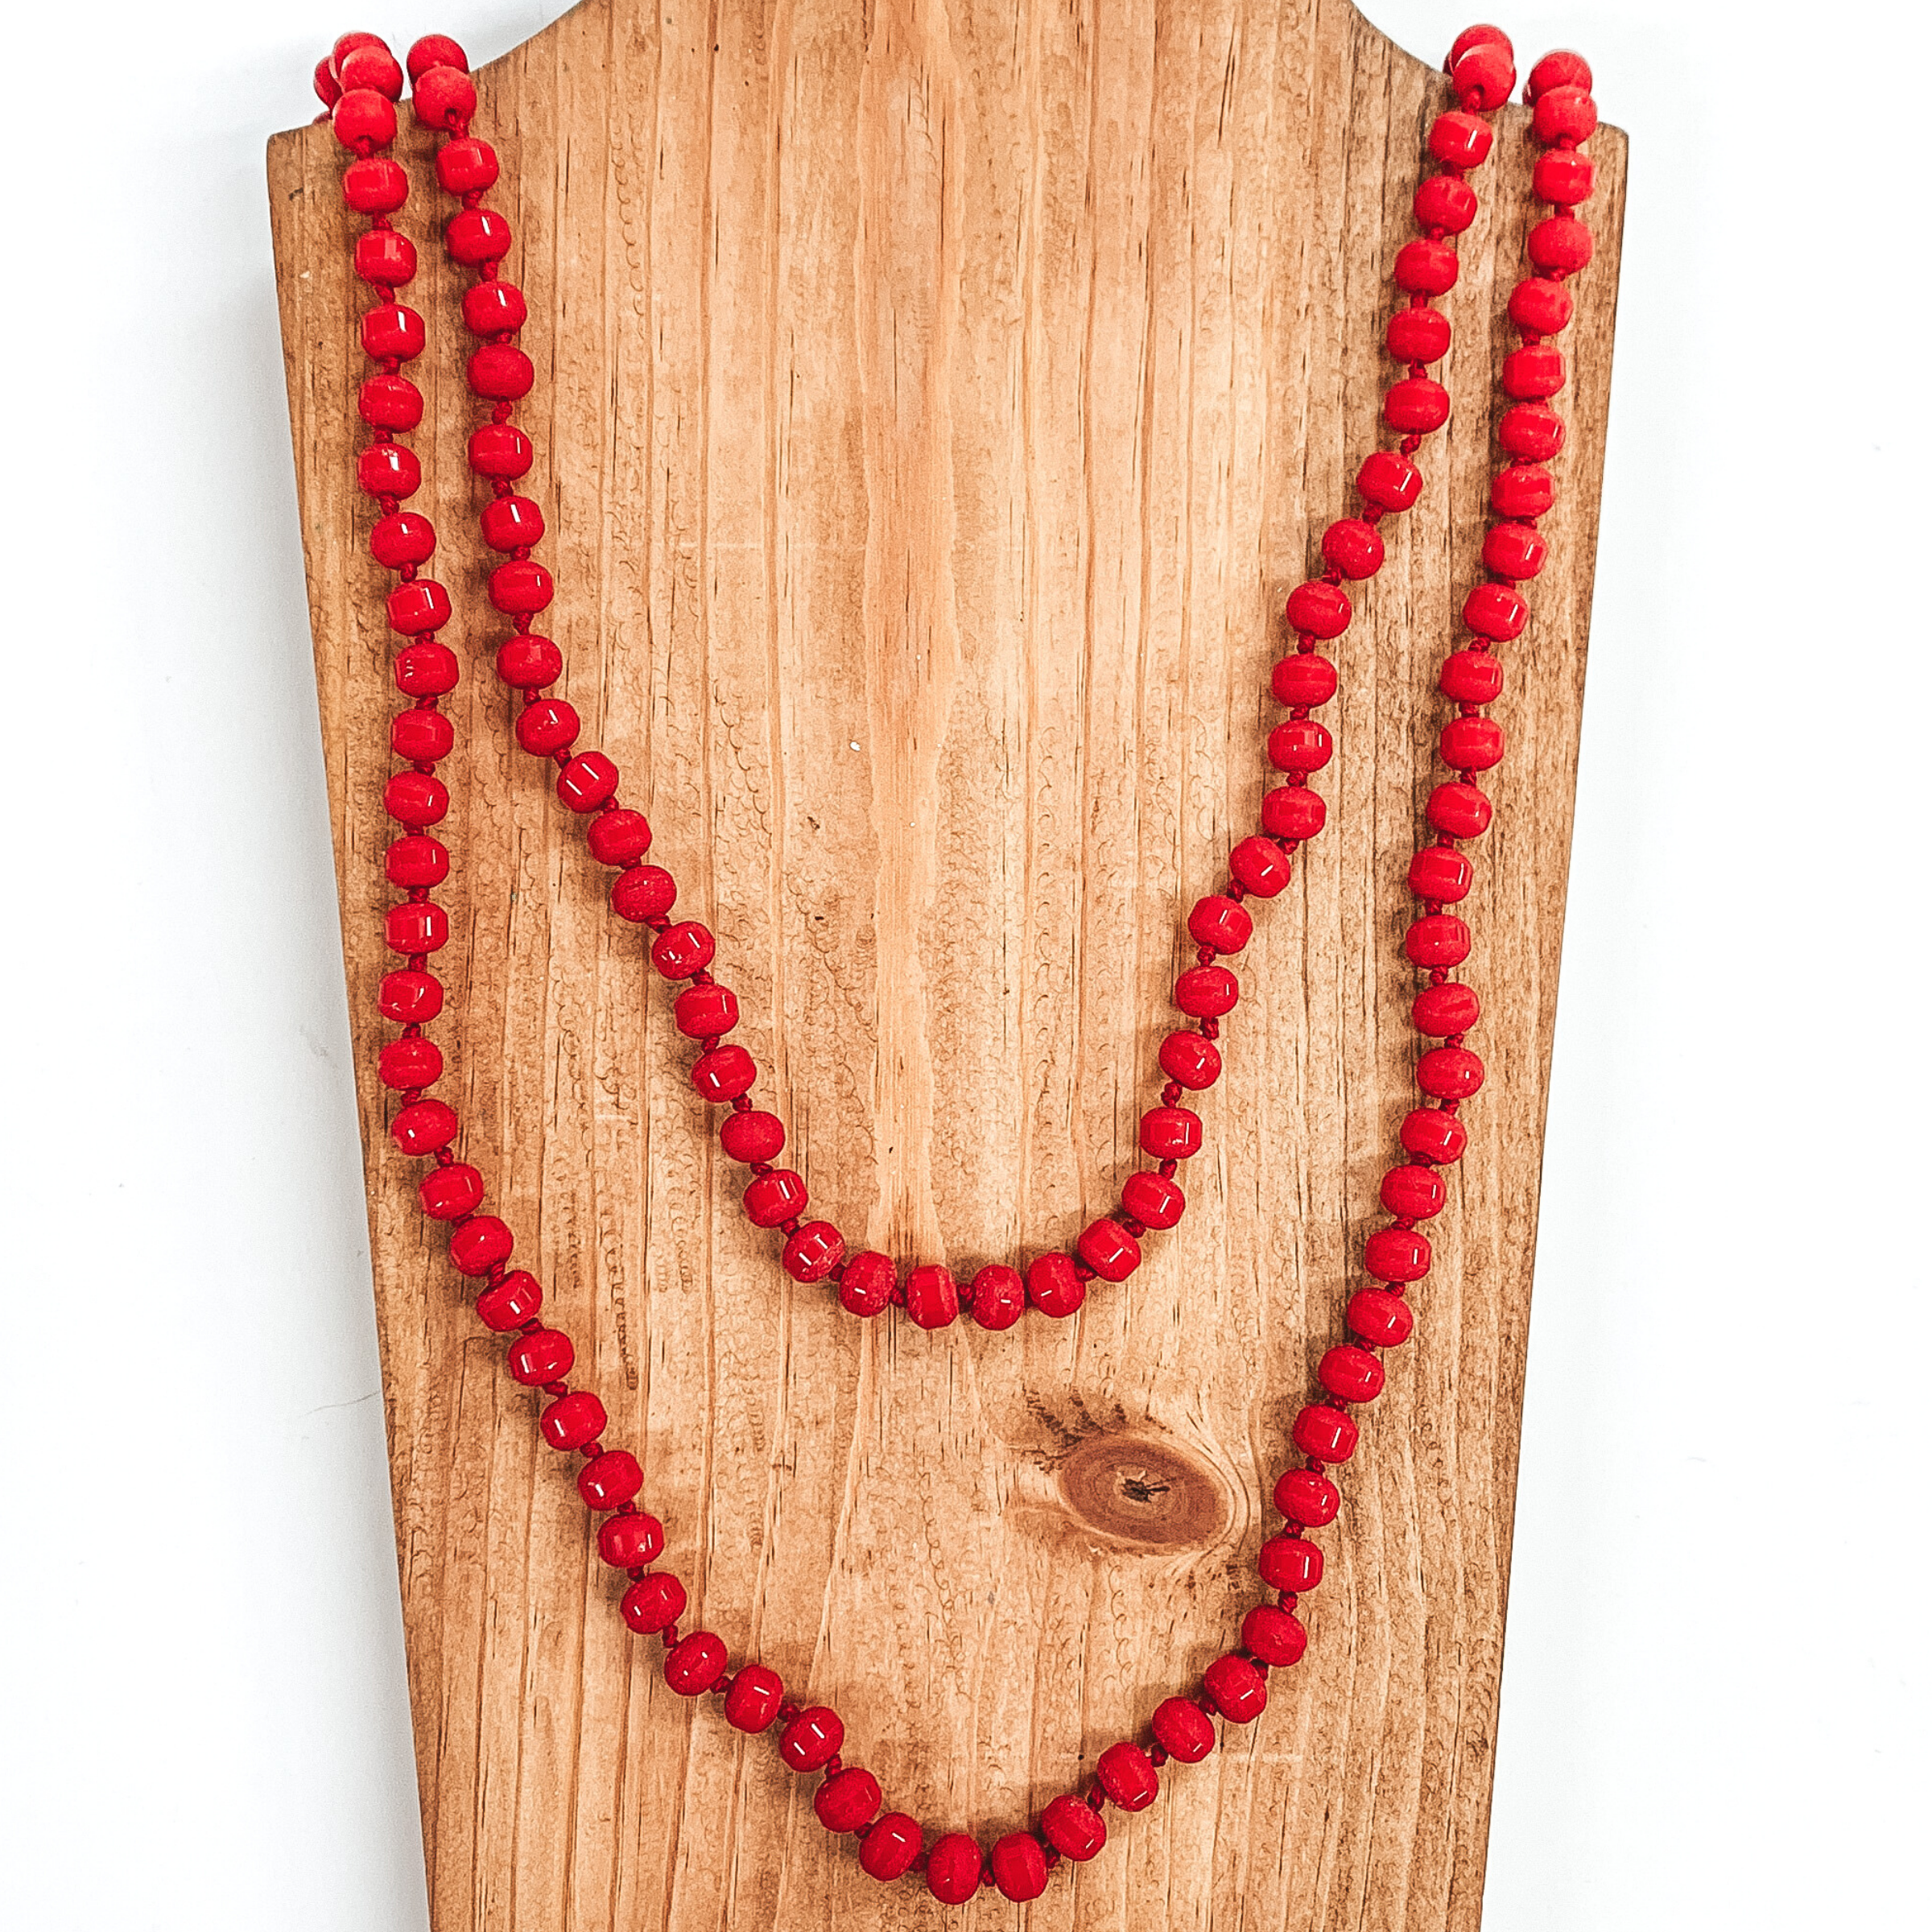 Crystal beaded necklace in druzy matte red. This necklace is pictured on a wooden necklace holder on a white background. 